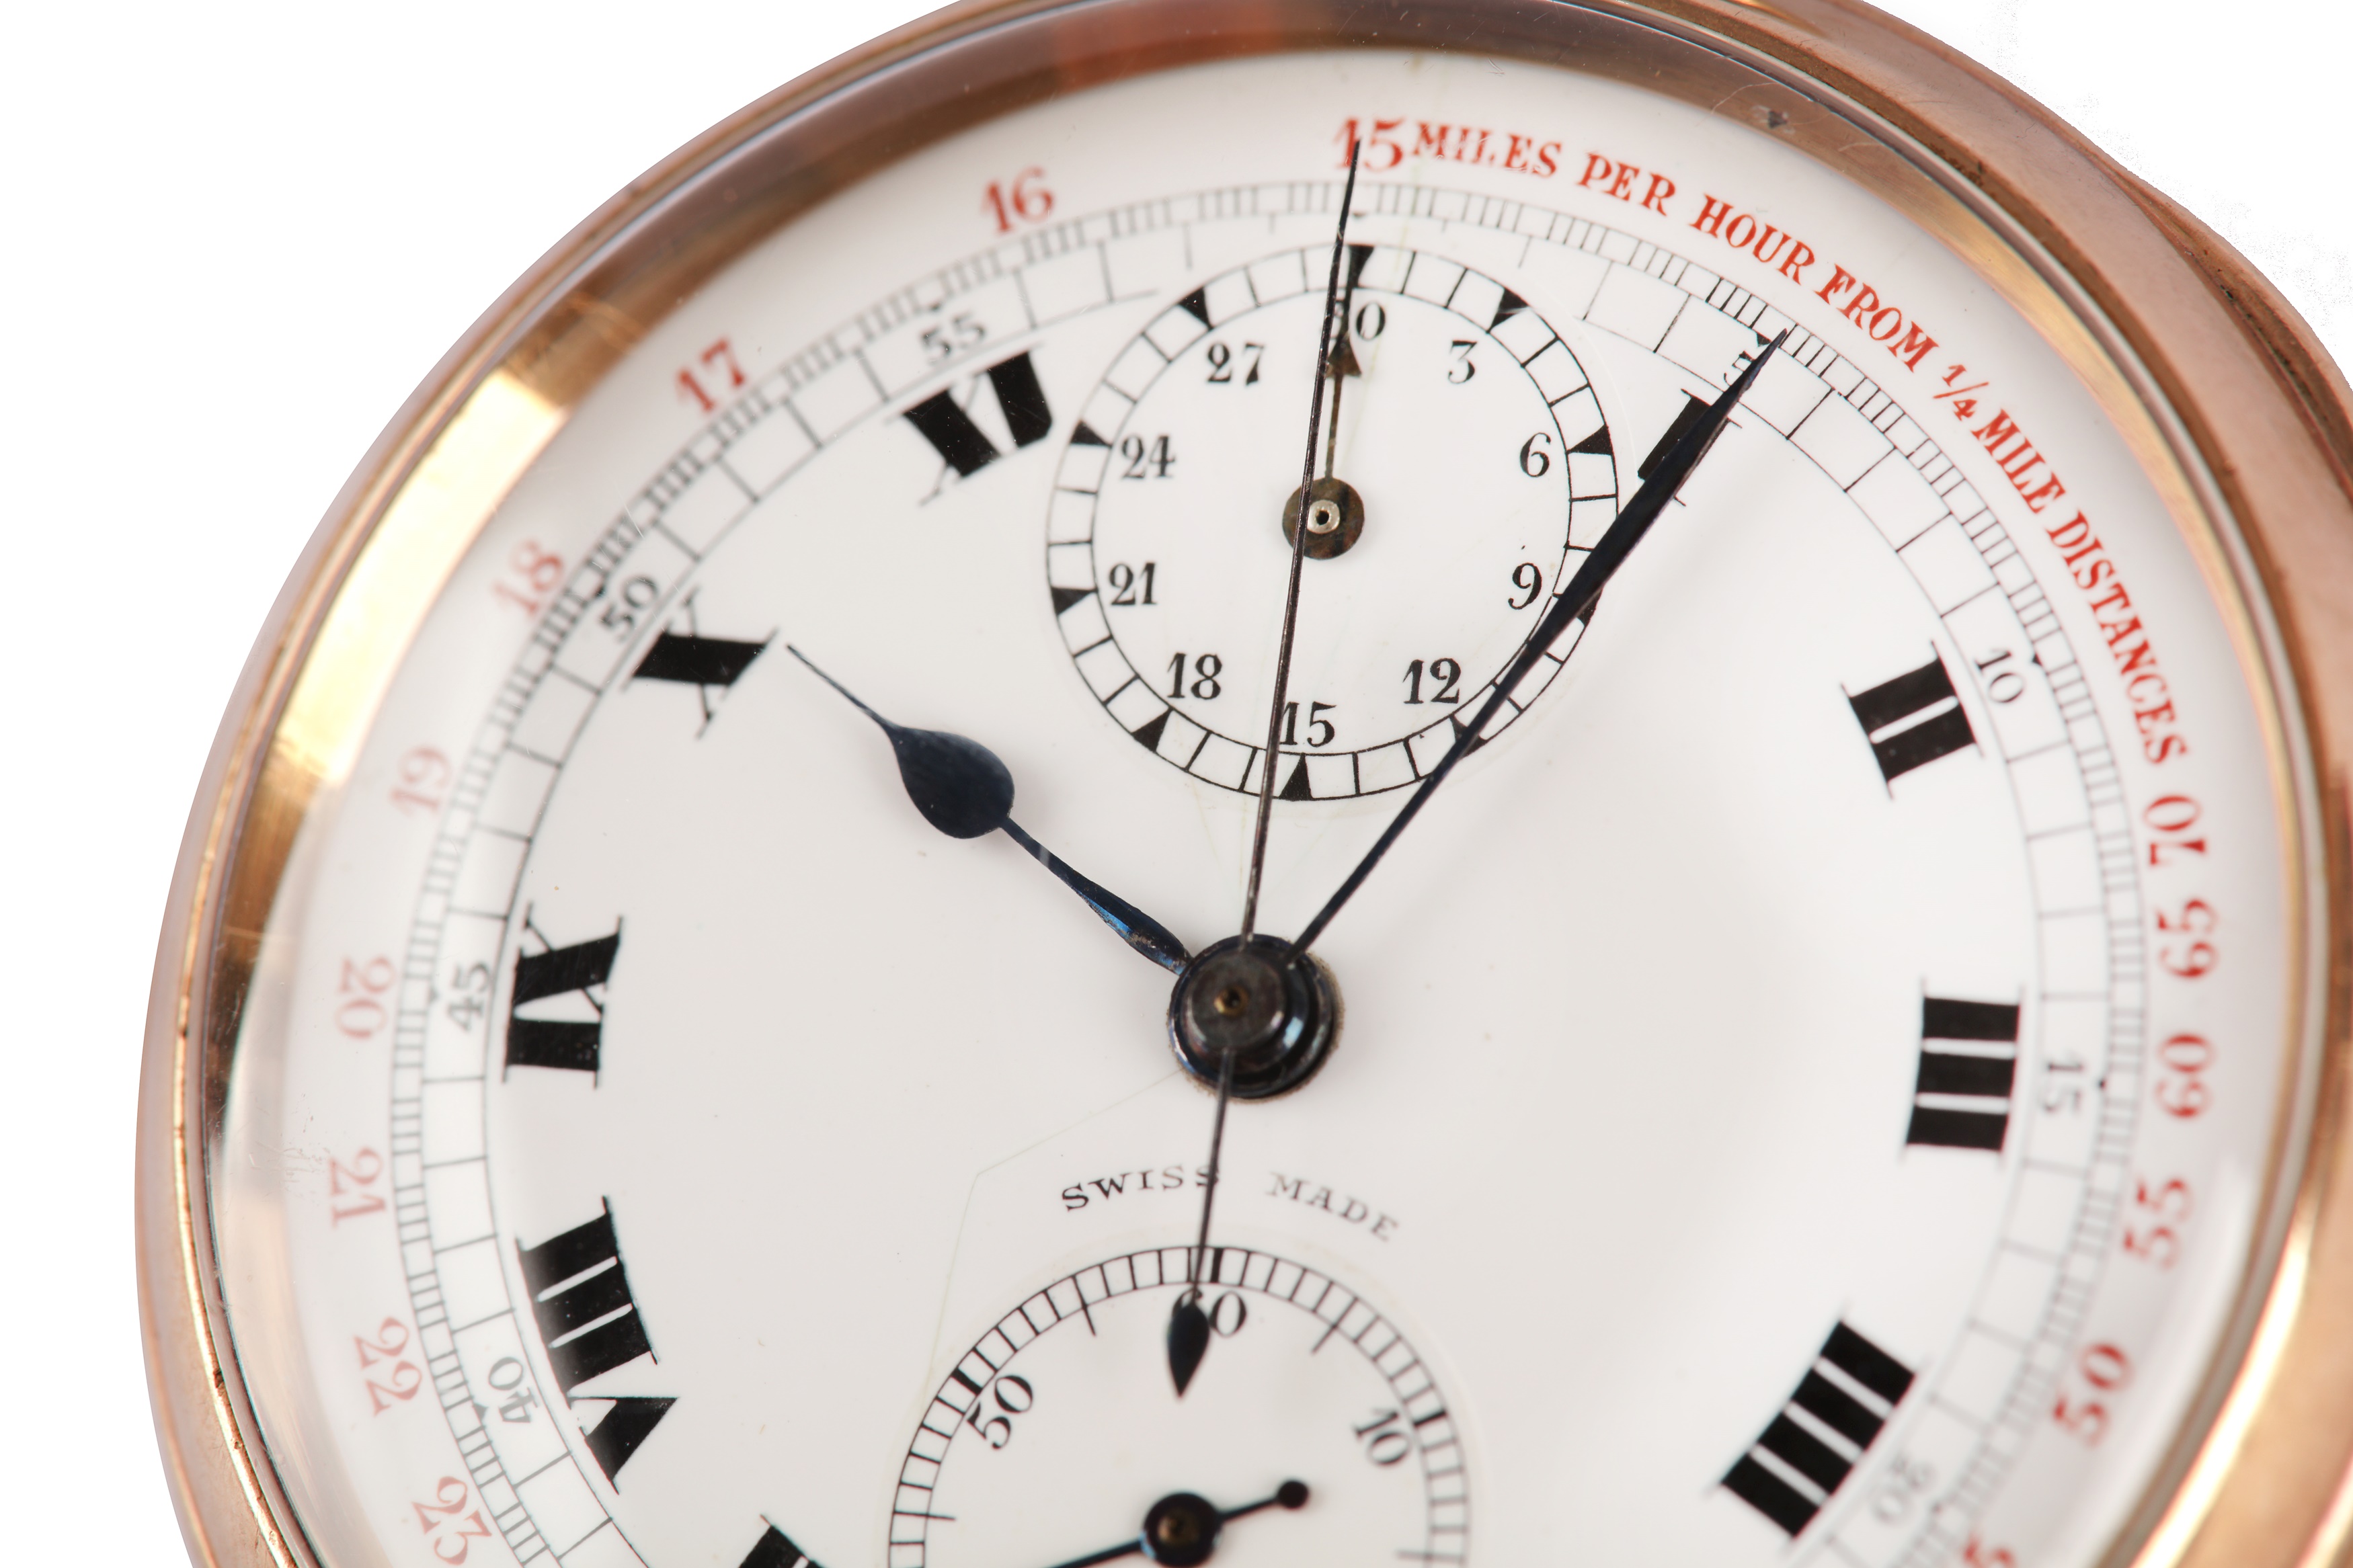 OPEN FACE CHRONOGRAPH POCKET WATCH. - Image 2 of 5